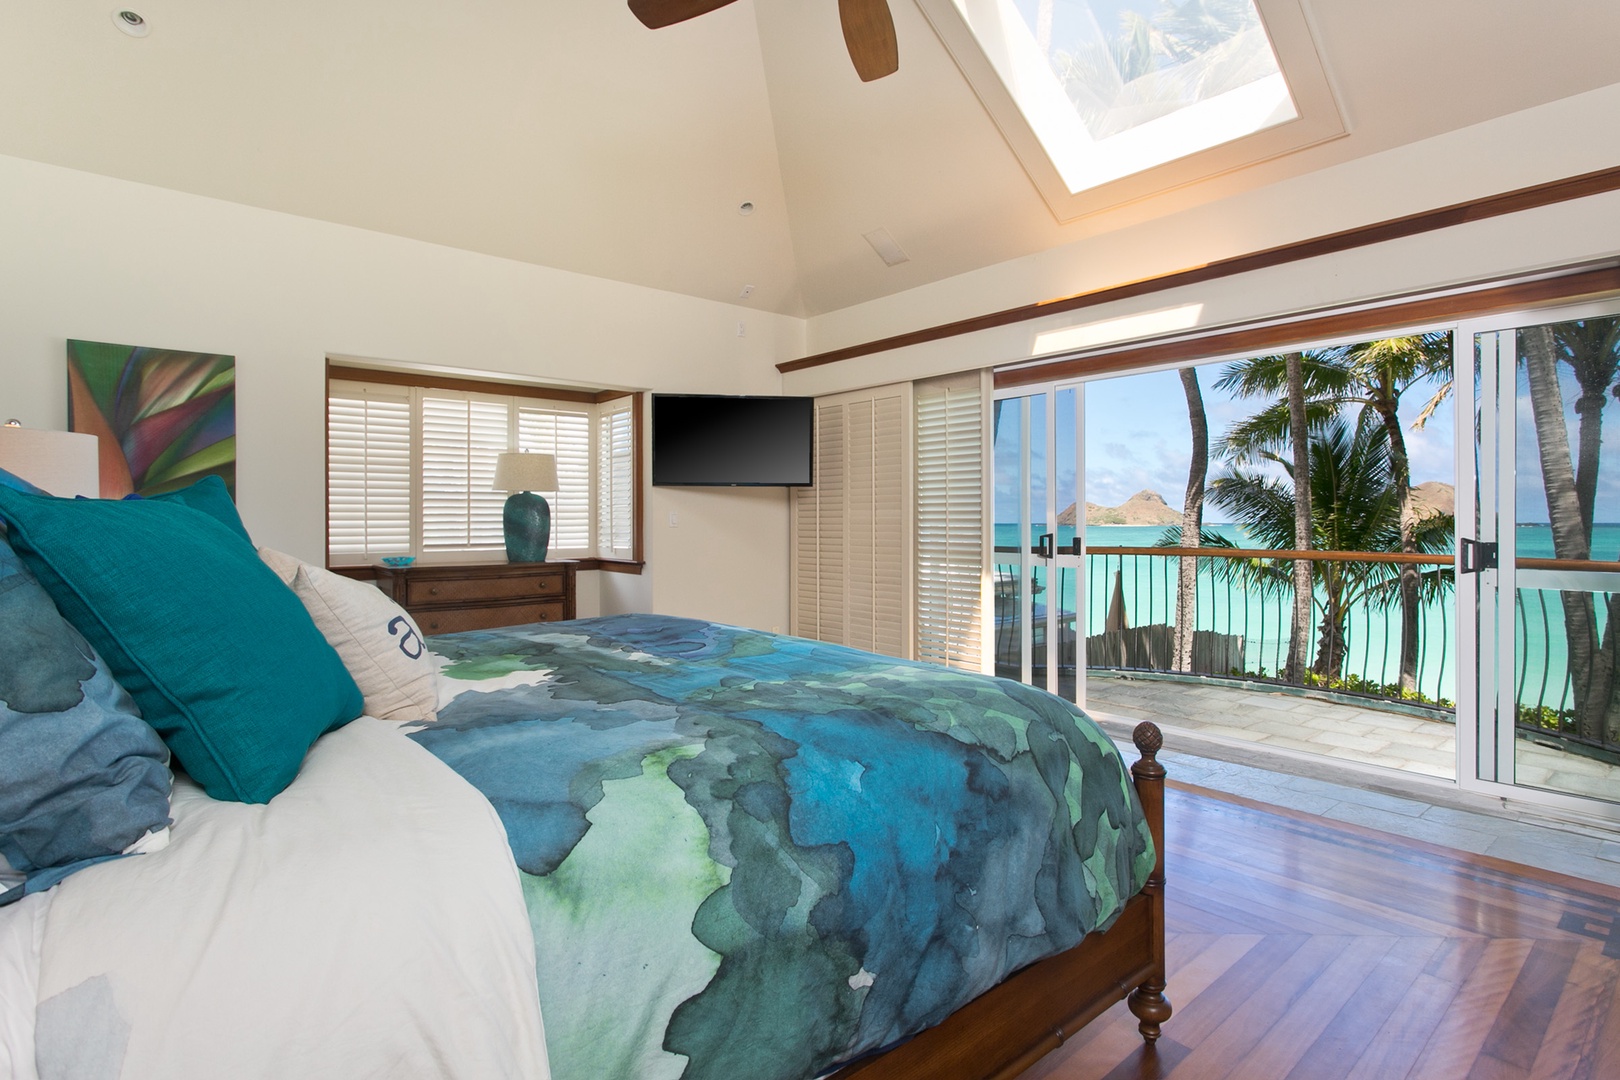 Kailua Vacation Rentals, Hale Melia* - Primary bedroom with TV and private lanai.